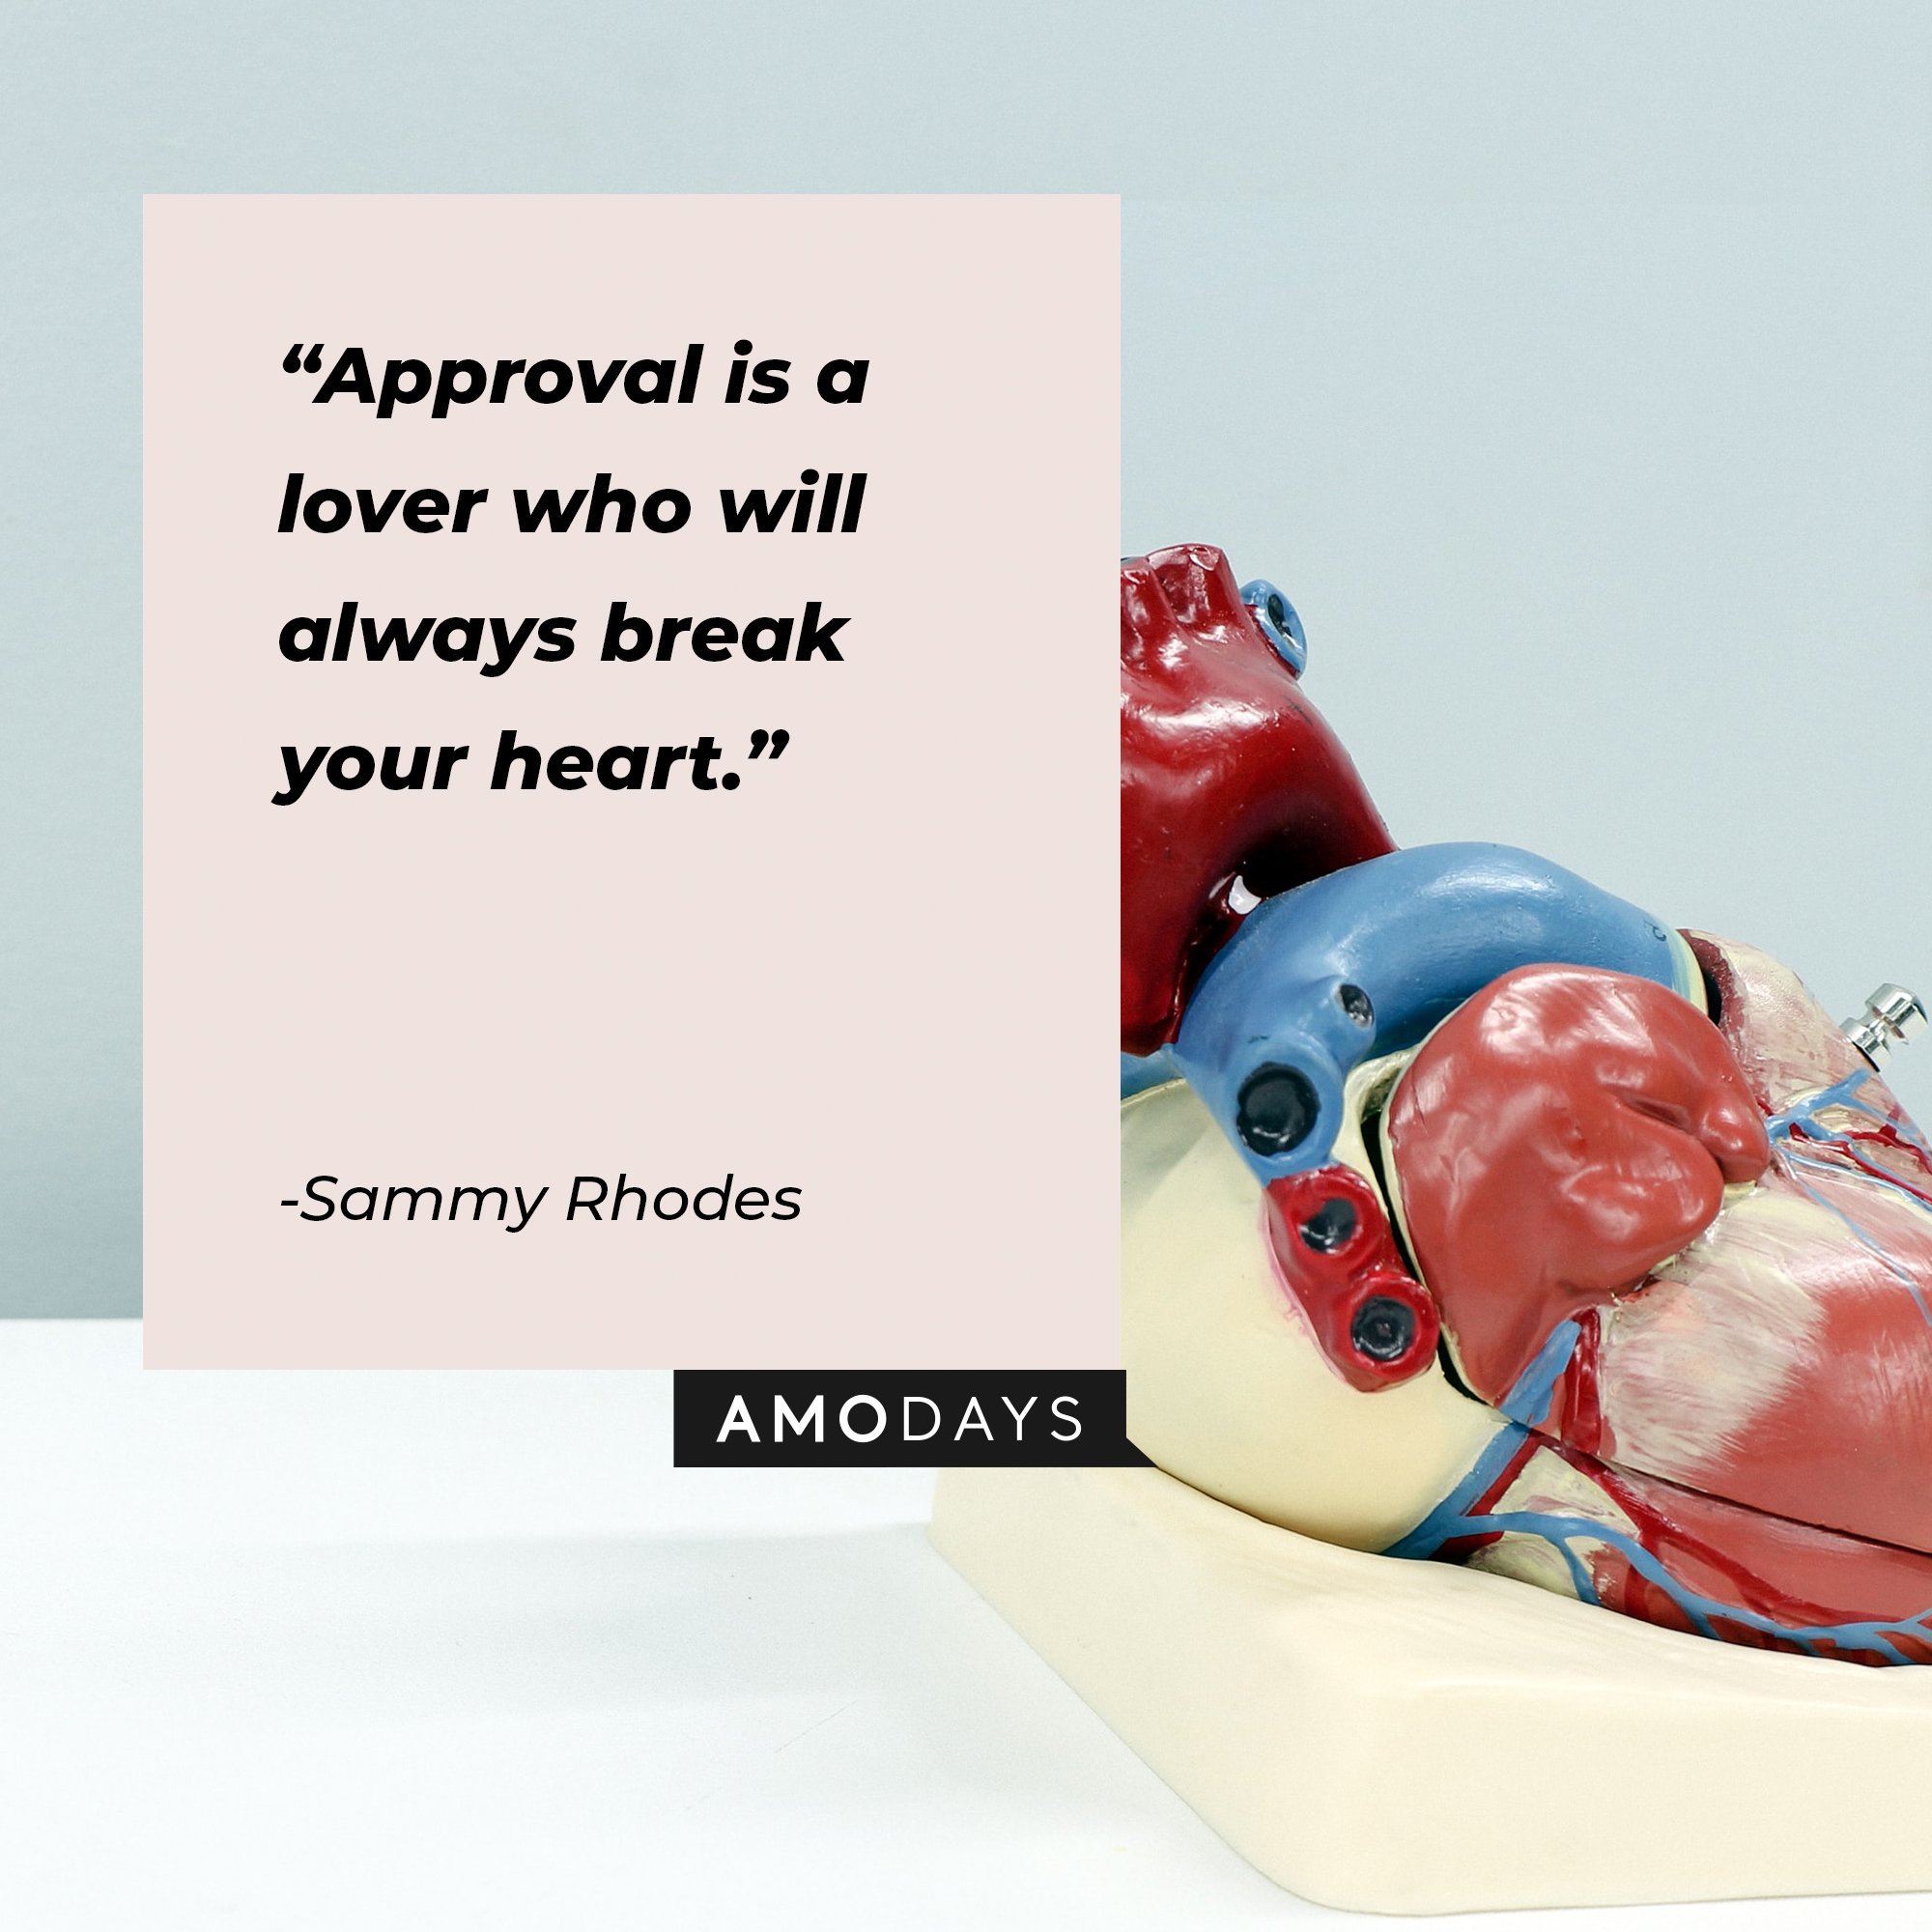 Sammy Rhodes’ quote: "Approval is a lover who will always break your heart." | Image: AmoDays